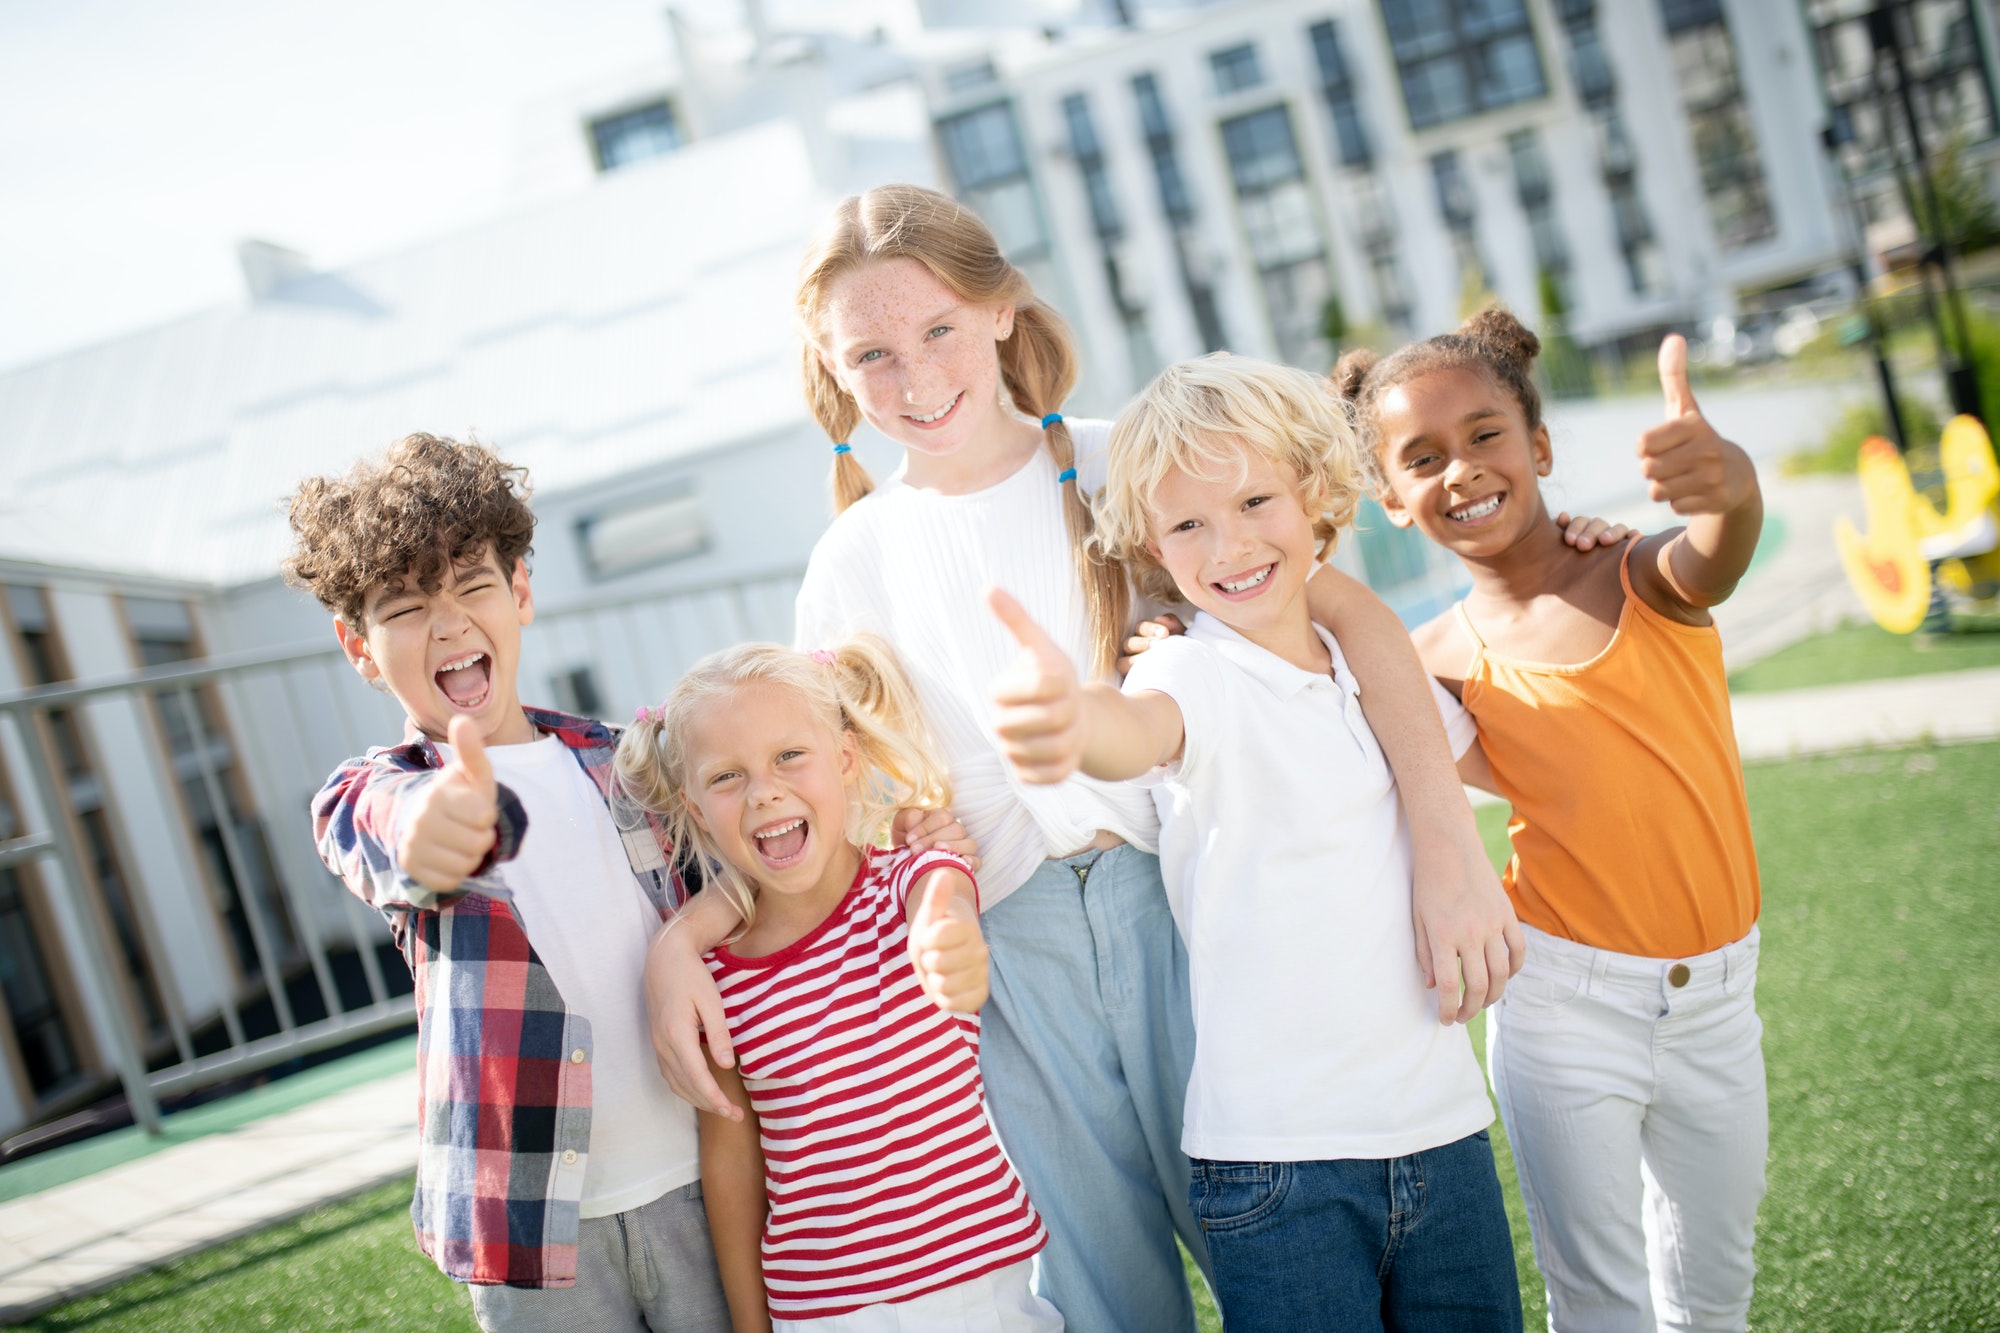 Cheerful children feeling truly happy after amazing day at school